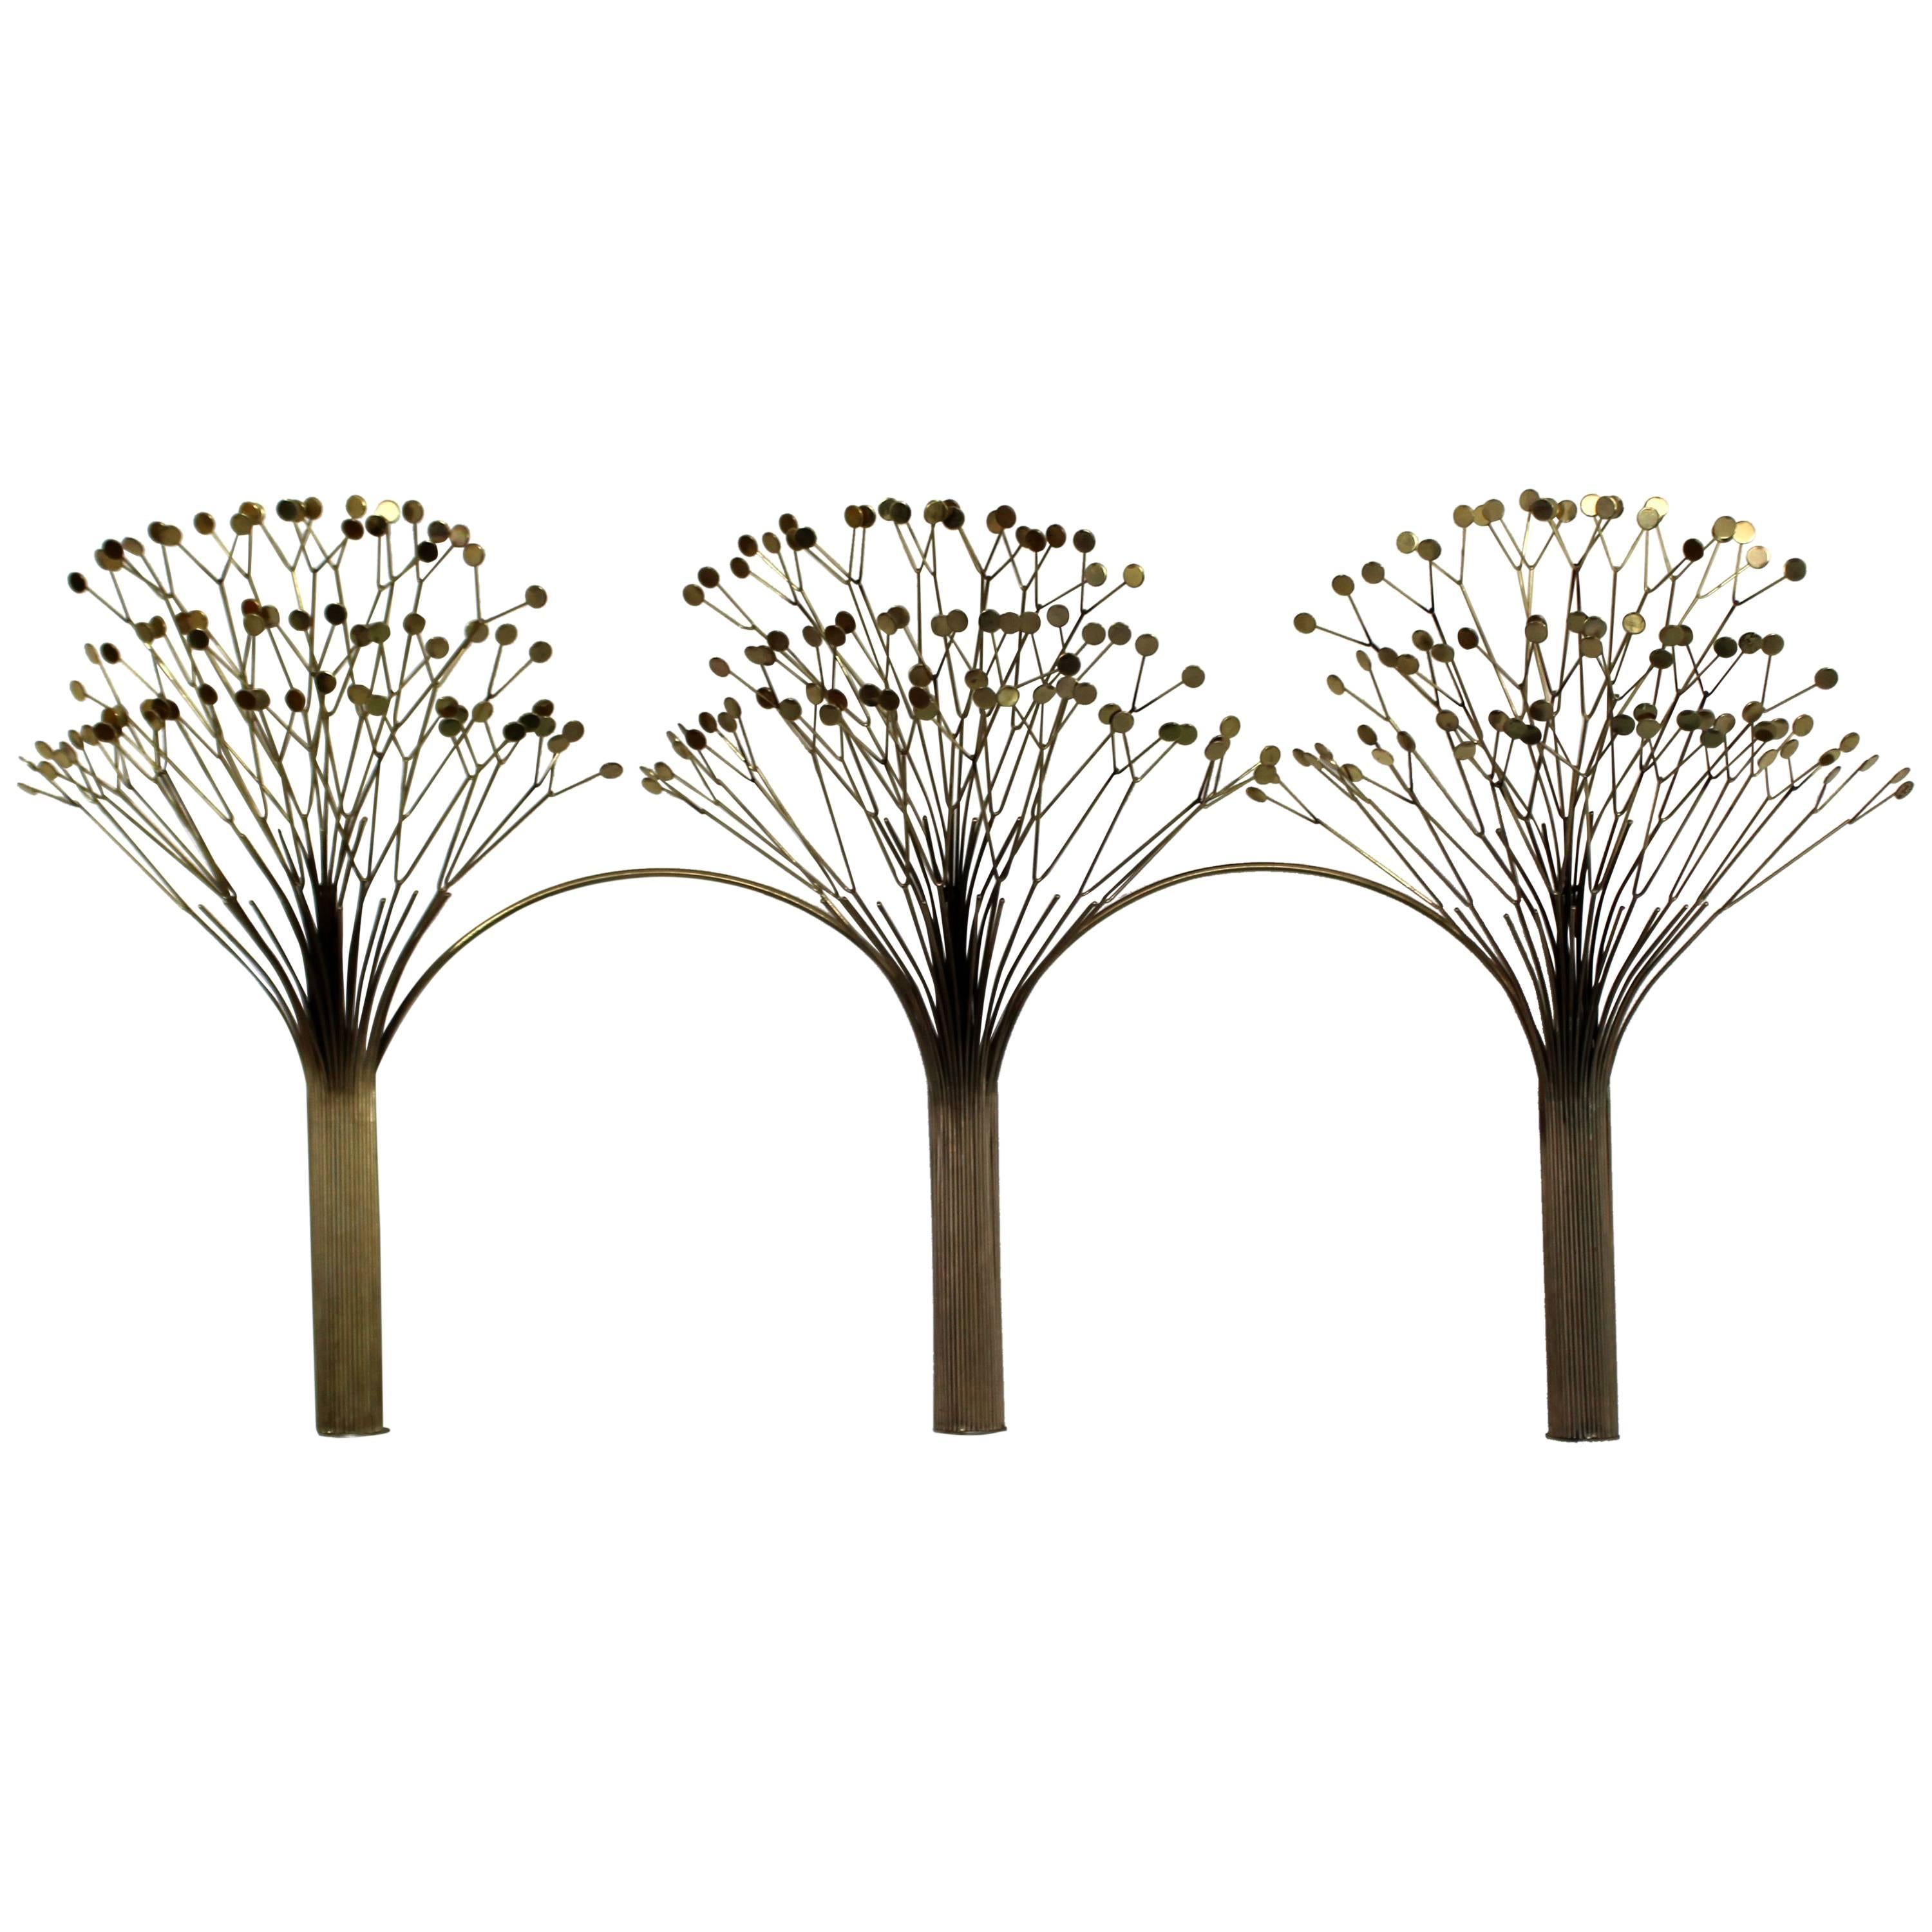 Mid-Century Modern Rare Jere Brass Three Tree Wall Sculpture Signed Dated 1970s